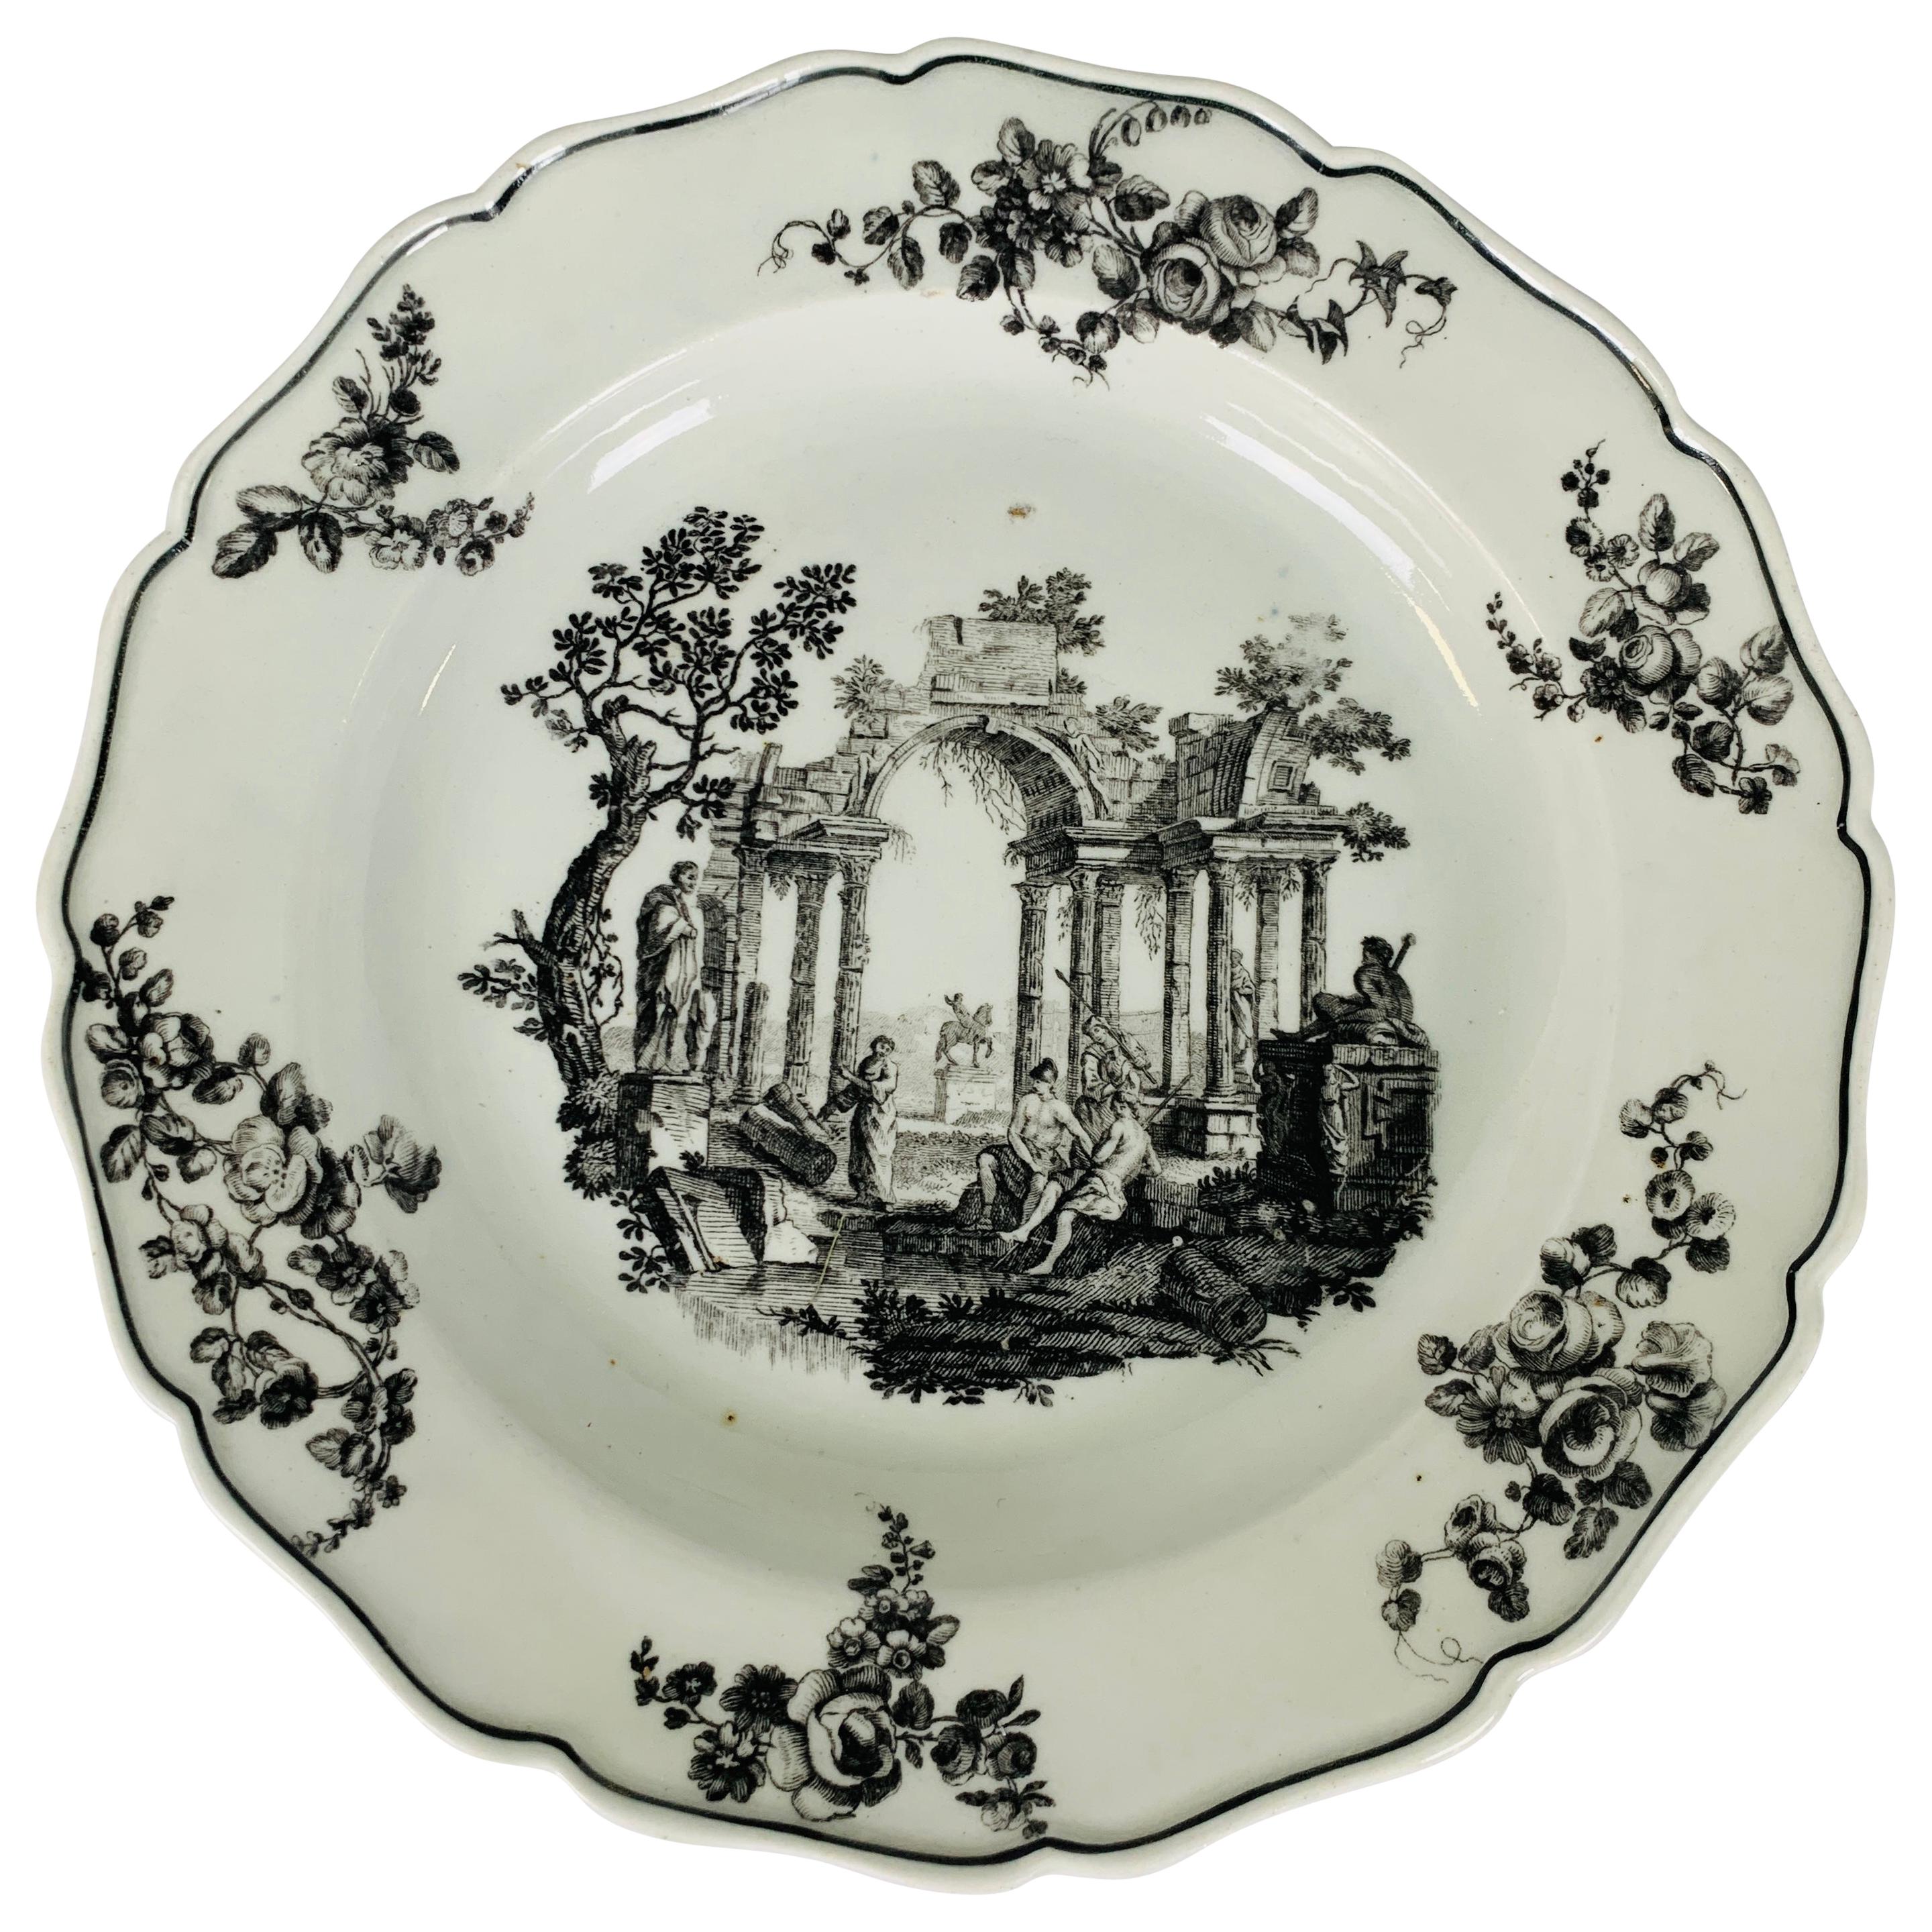 First Period Worcester Dish 18th Century Showing Scholars in Ancient Ruins